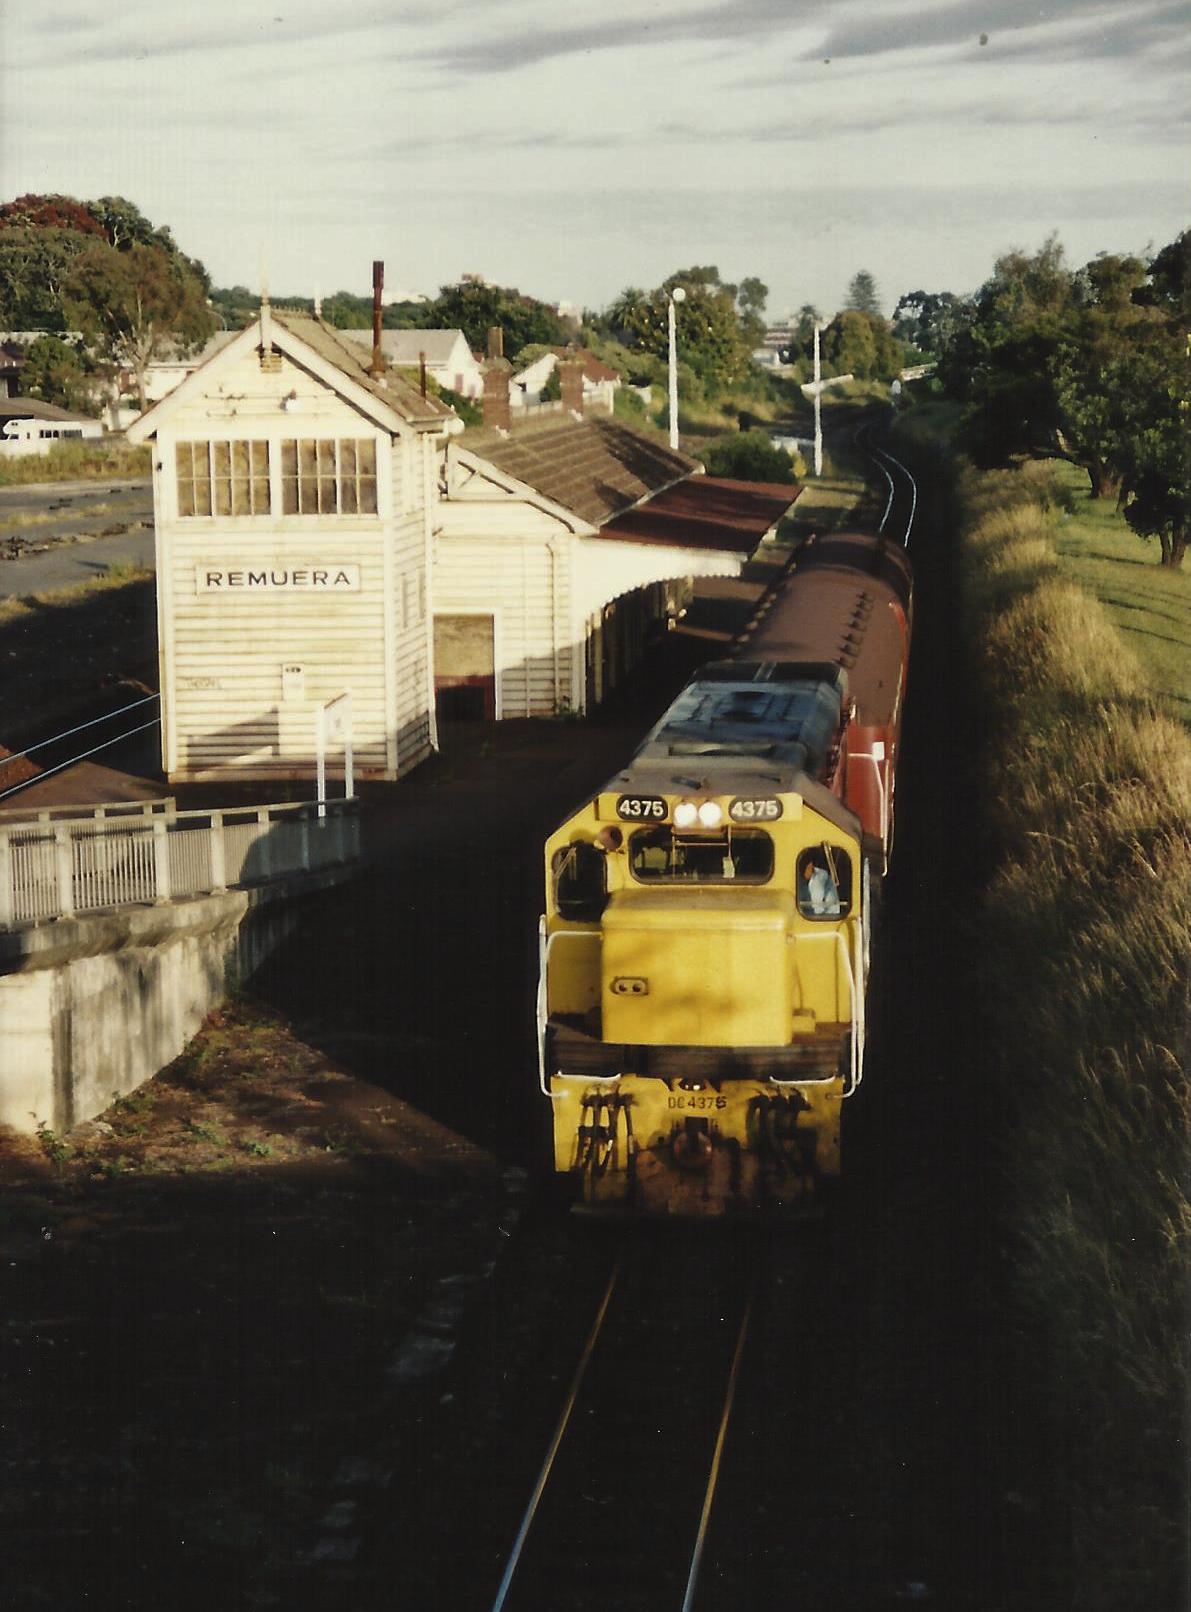 Remuera Railway Station January 1988. Photograph by Andrew Surgenor - www.flickr.com.